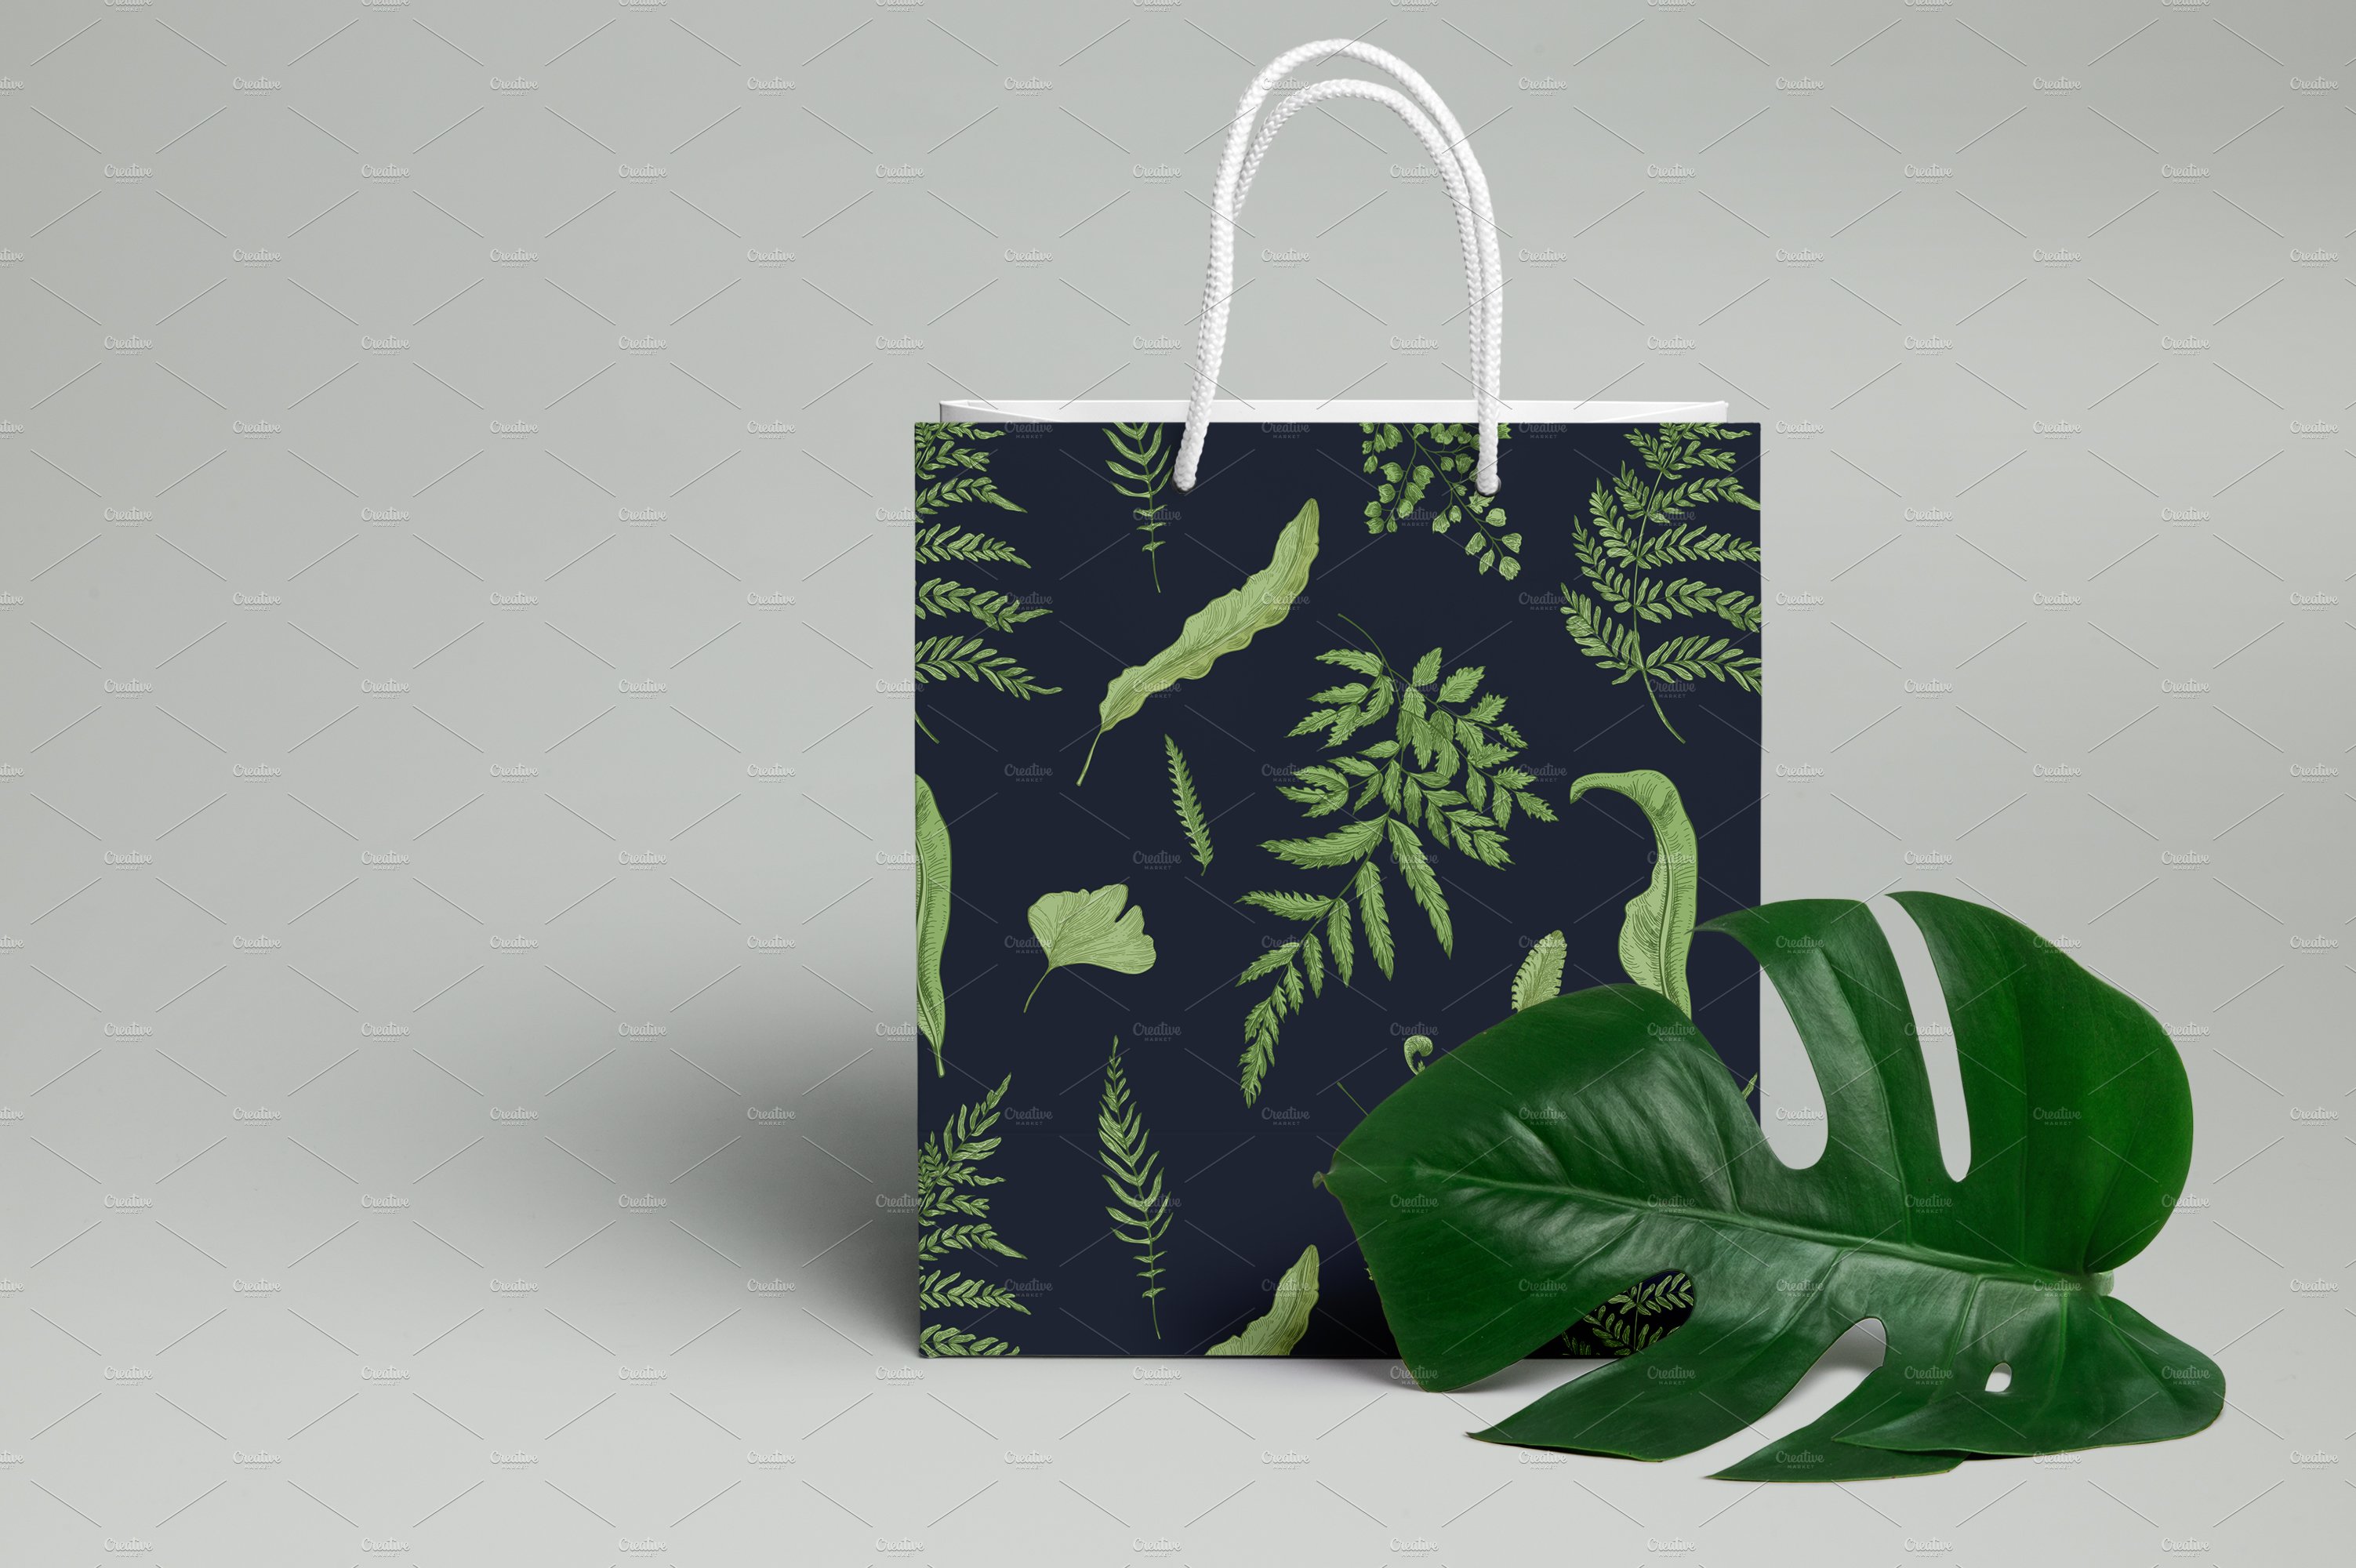 Paper bag with green leaves on a grey background.